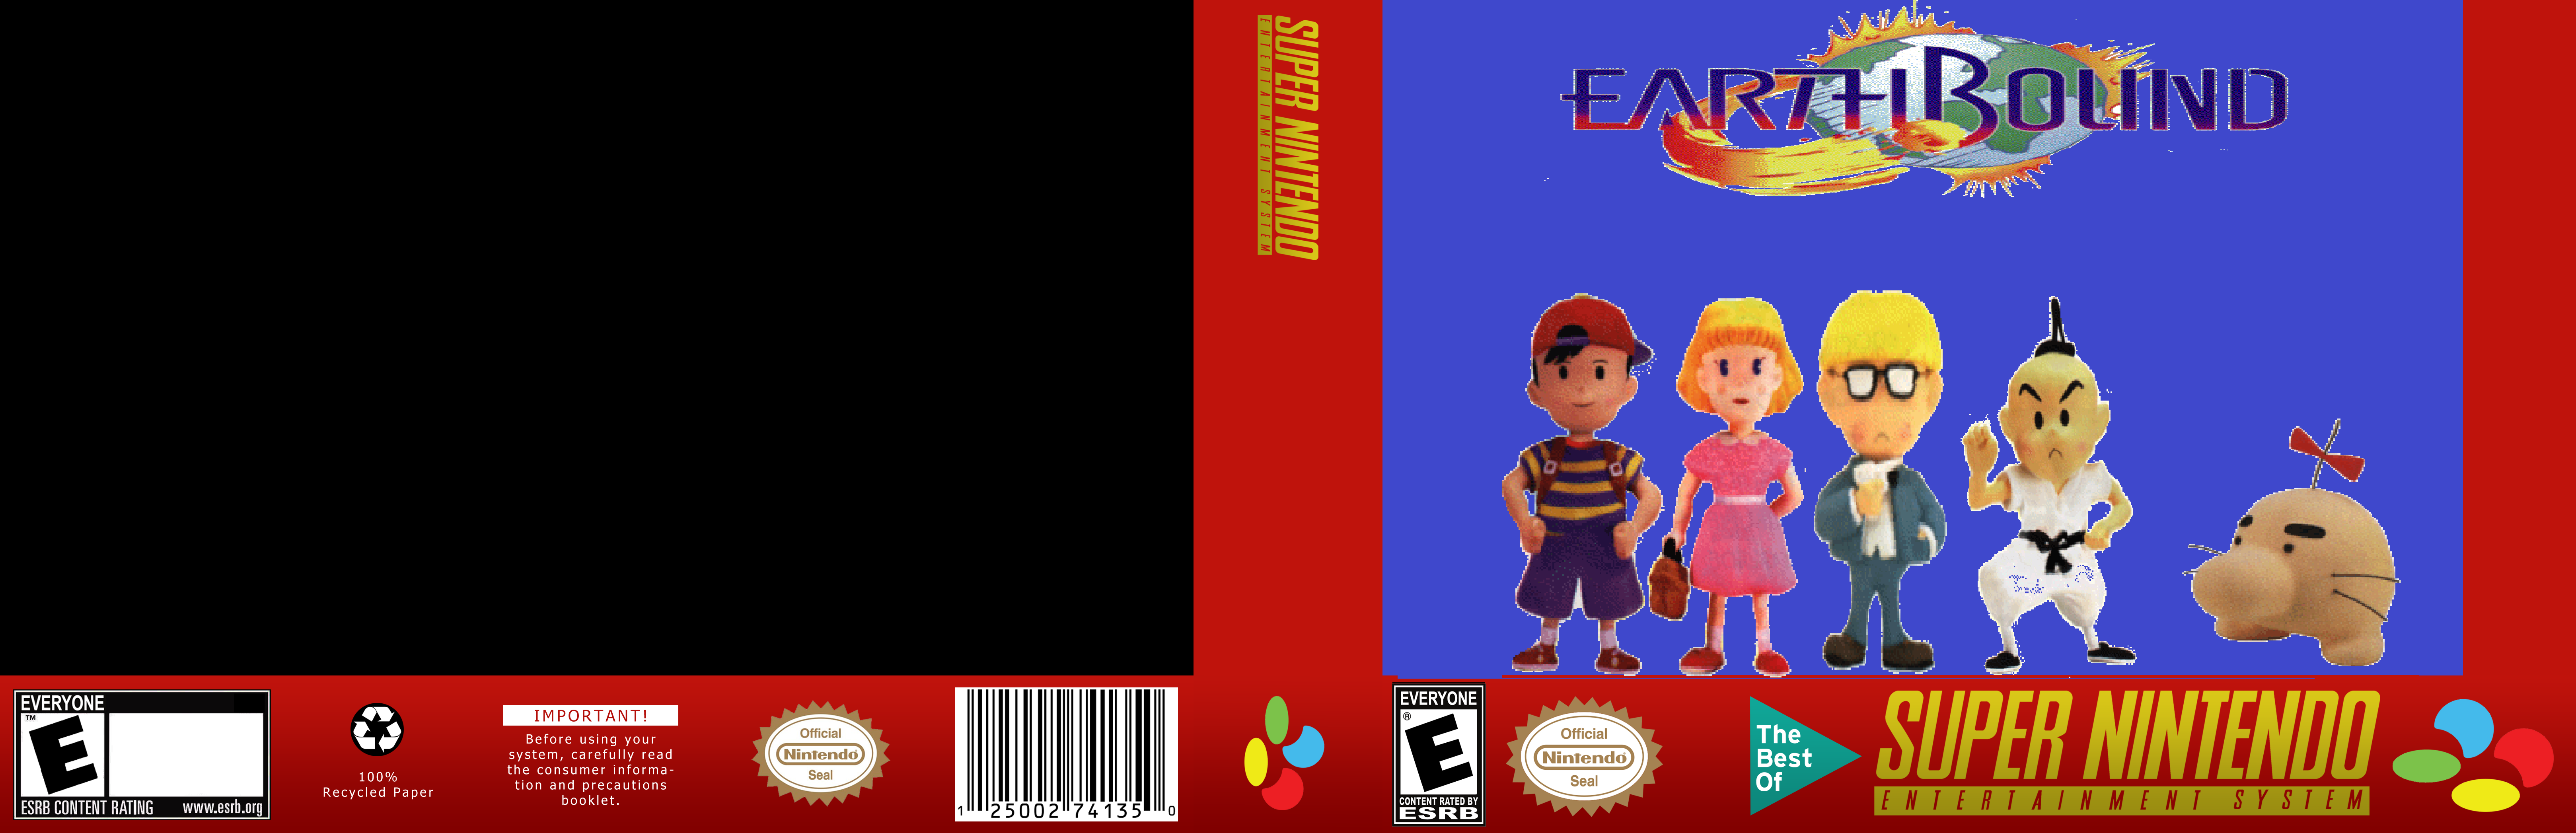 Earthbound box Preview. box cover